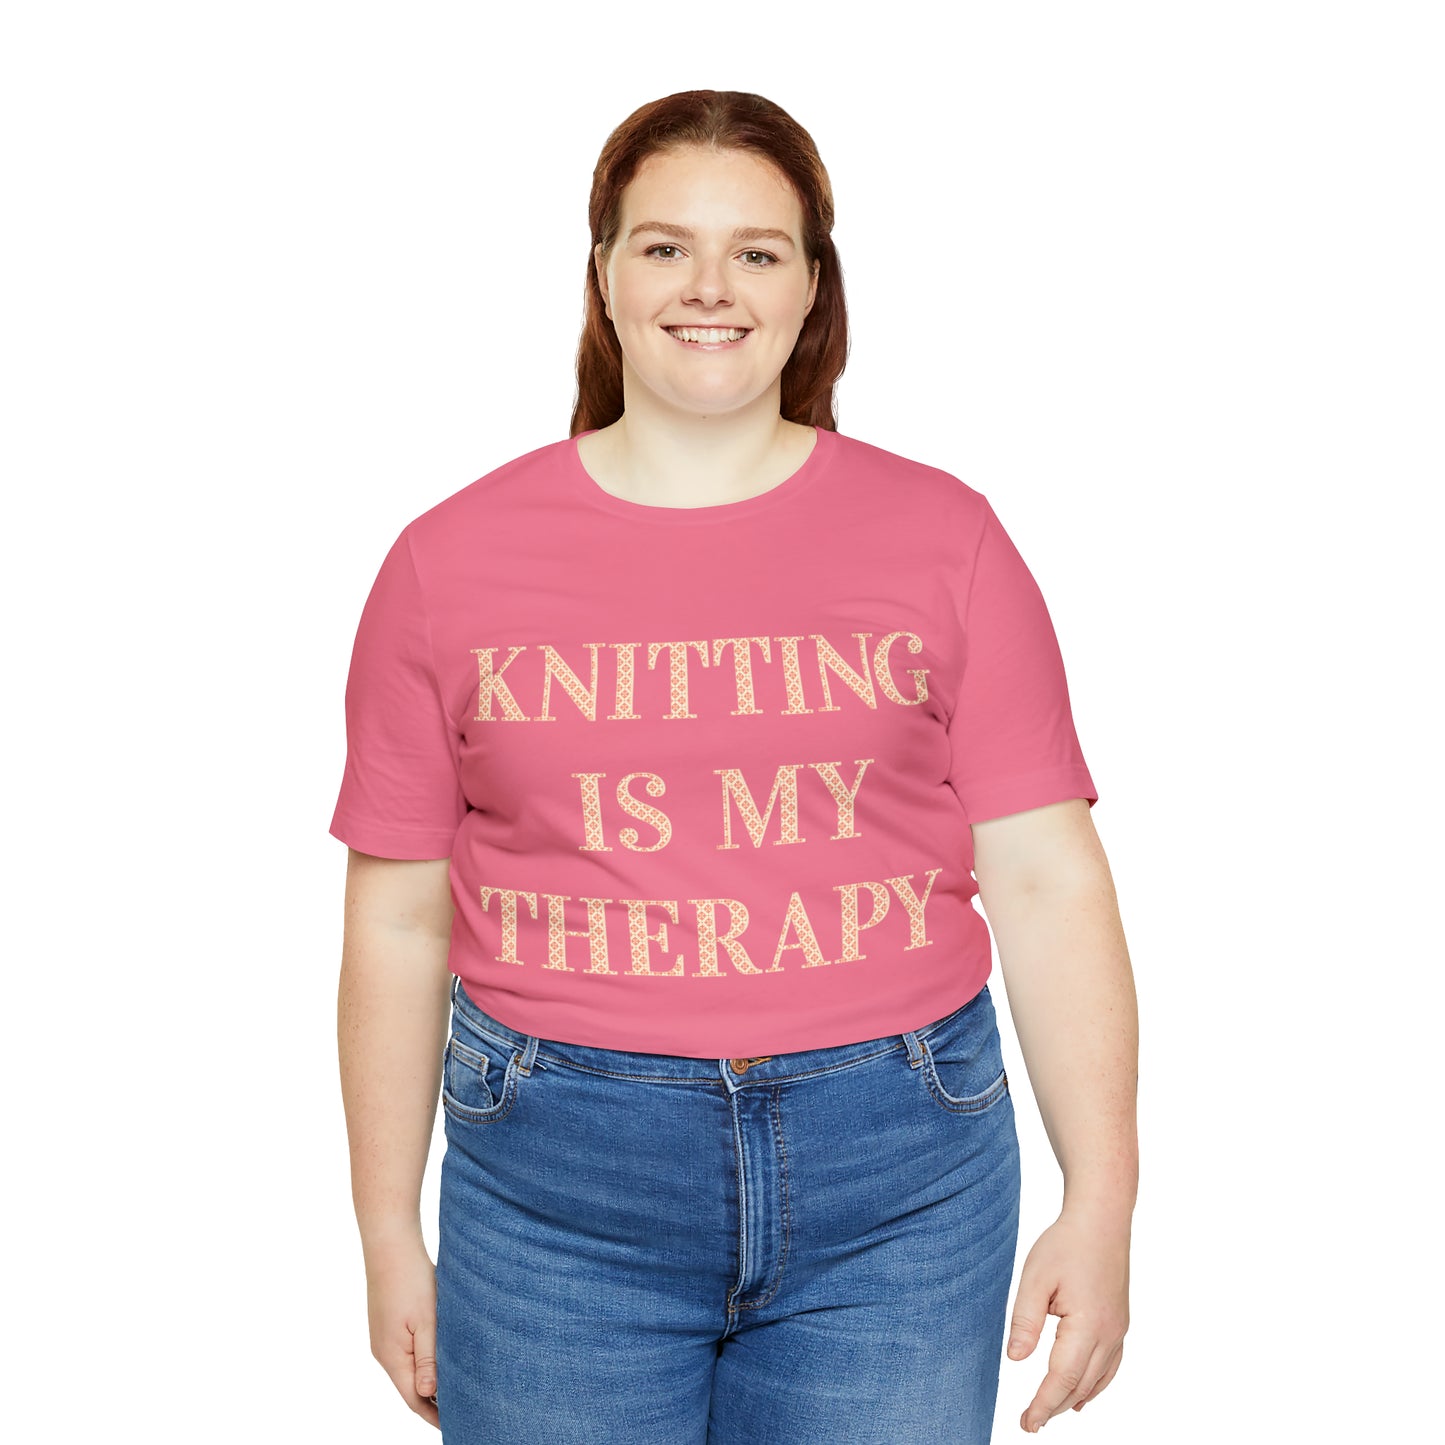 Knitting Is My Therapy- Adult, Regular Fit, Soft Cotton T-shirt